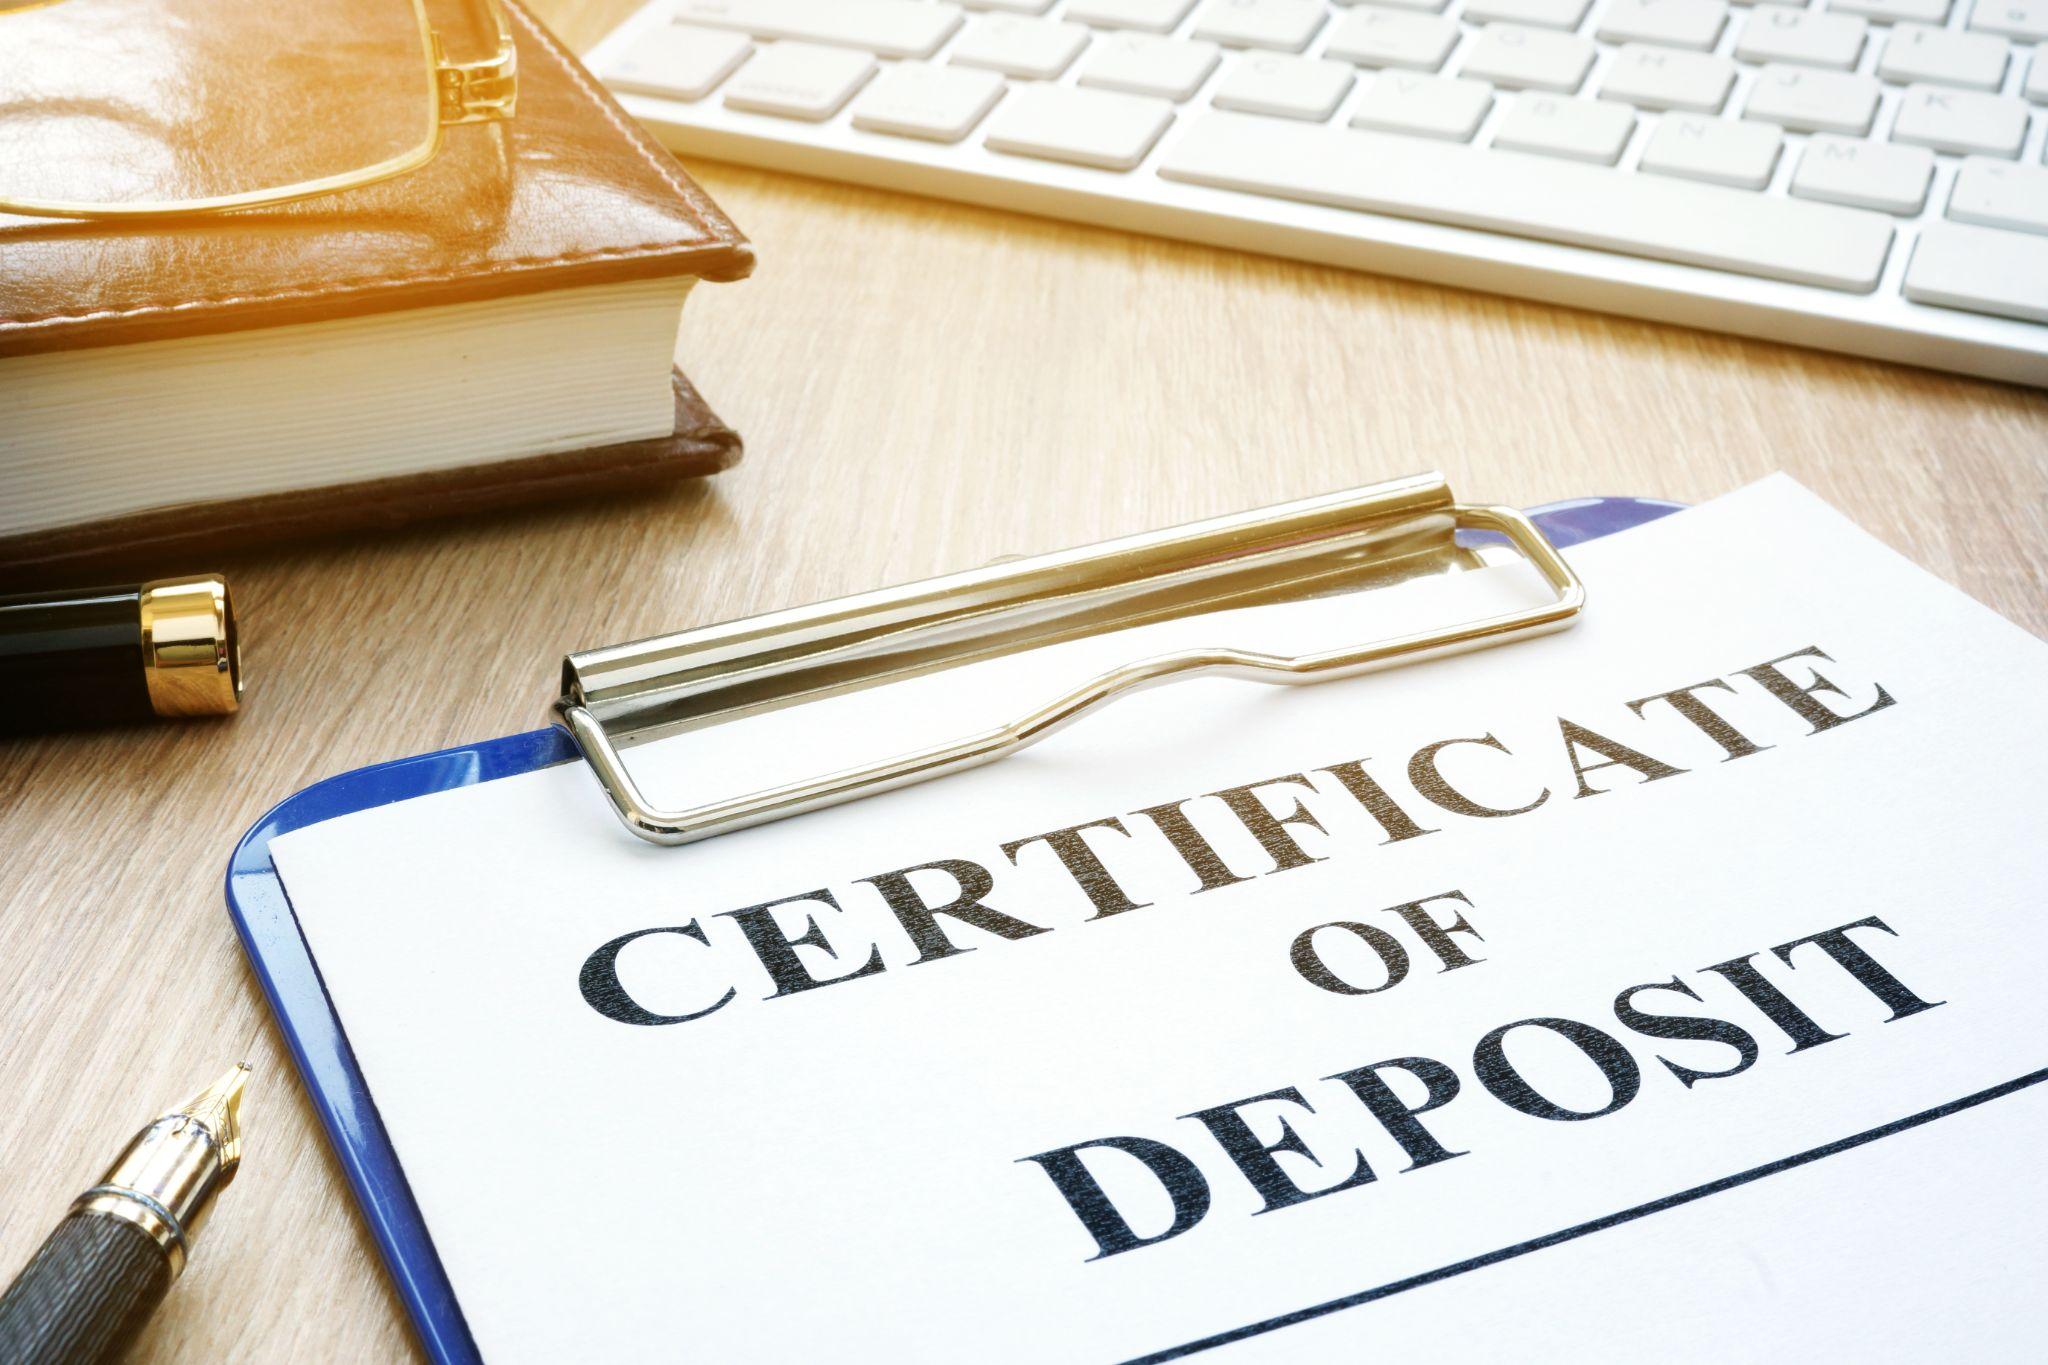 Certificate of deposit and pen on a desk